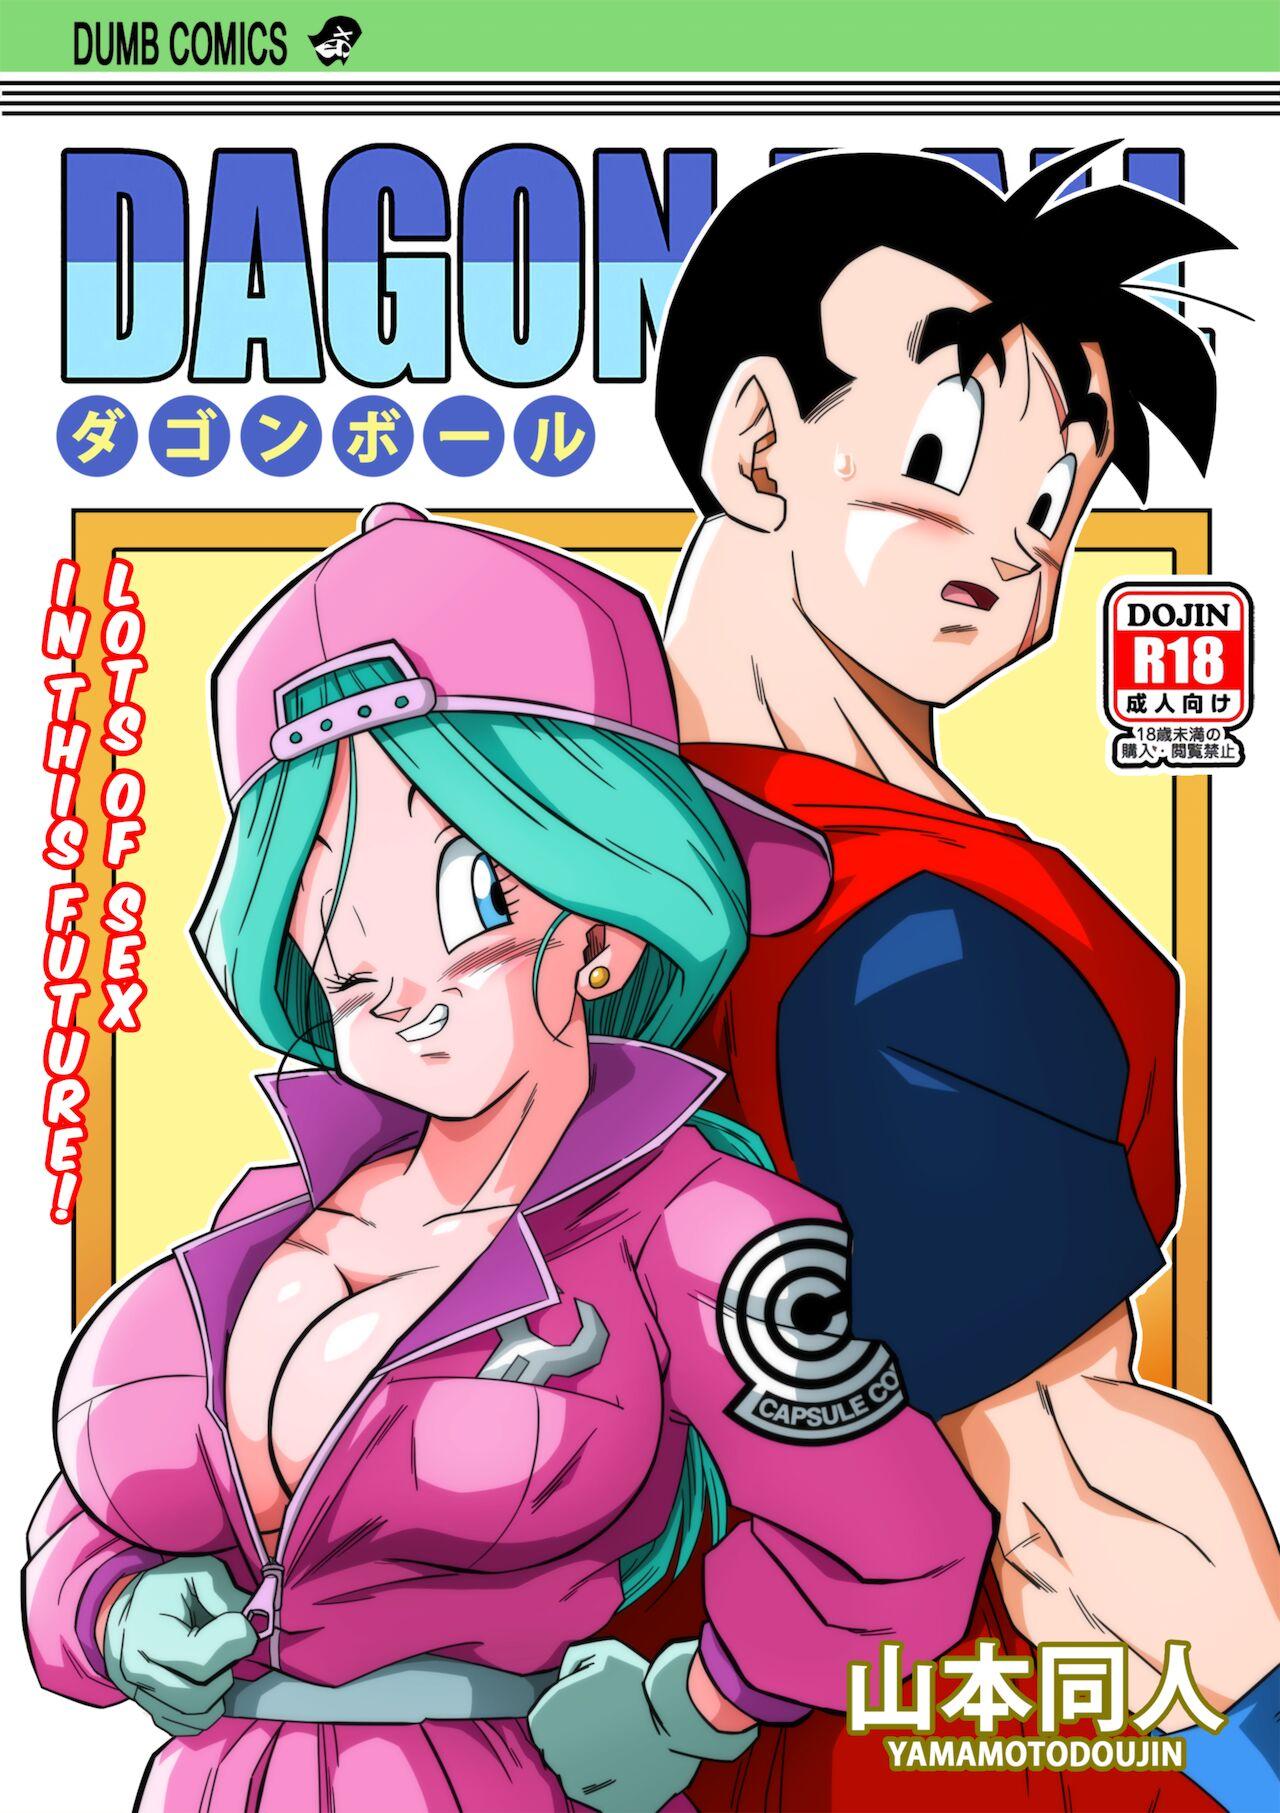 Stripping Yamamoto Doujin-Lots Of Sex In This Future!! - Dragon ball z Dragon ball Tanned - Page 1